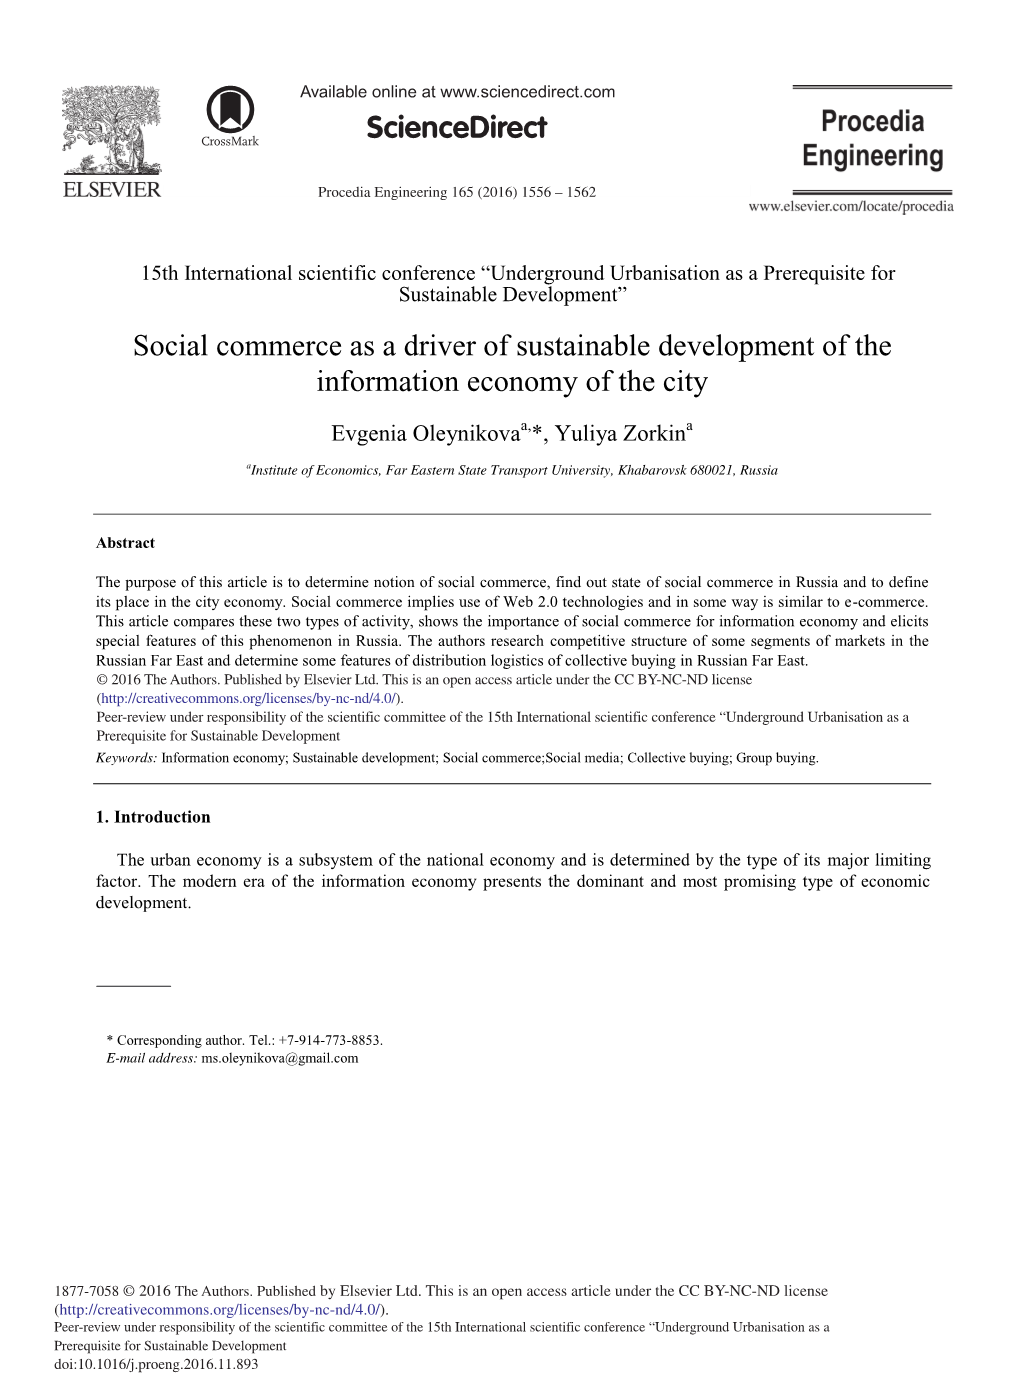 Social Commerce As a Driver of Sustainable Development of the Information Economy of the City